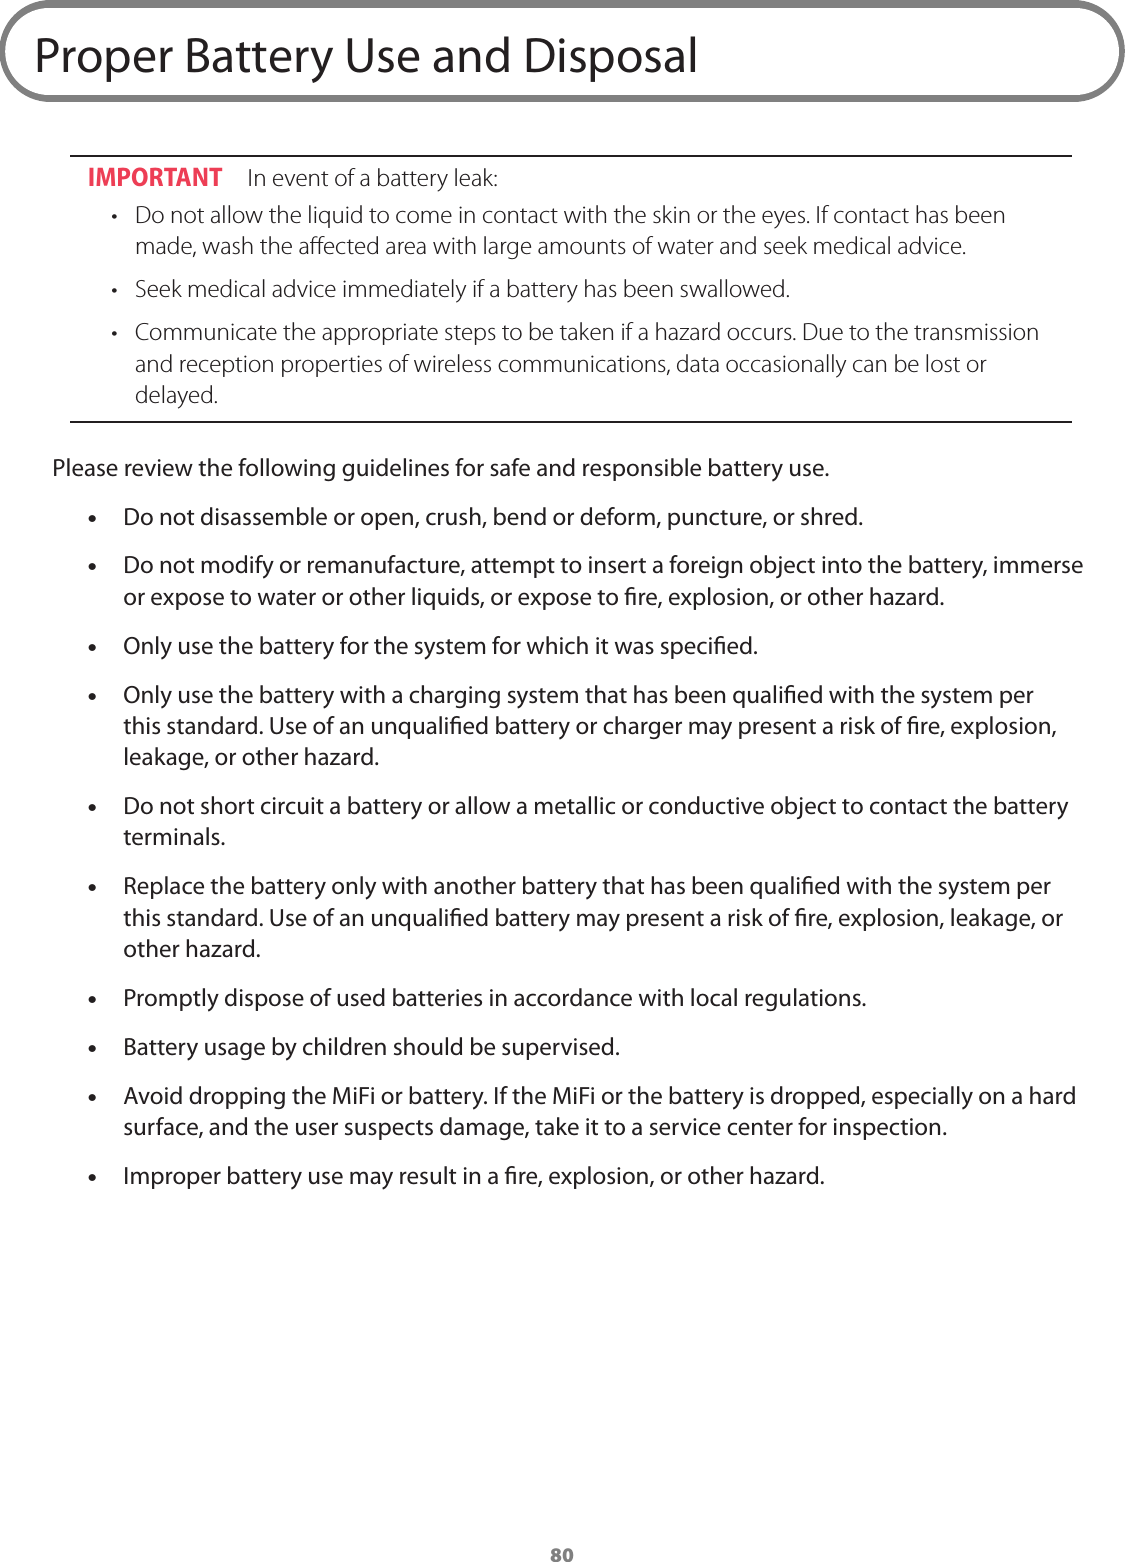 80Proper Battery Use and DisposalIMPORTANT  In event of a battery leak:• Do not allow the liquid to come in contact with the skin or the eyes. If contact has beenmade, wash the aﬀected area with large amounts of water and seek medical advice.• Seek medical advice immediately if a battery has been swallowed.• Communicate the appropriate steps to be taken if a hazard occurs. Due to the transmissionand reception properties of wireless communications, data occasionally can be lost ordelayed.Please review the following guidelines for safe and responsible battery use. •Do not disassemble or open, crush, bend or deform, puncture, or shred. •Do not modify or remanufacture, attempt to insert a foreign object into the battery, immerseor expose to water or other liquids, or expose to re, explosion, or other hazard. •Only use the battery for the system for which it was specied. •Only use the battery with a charging system that has been qualied with the system perthis standard. Use of an unqualied battery or charger may present a risk of re, explosion,leakage, or other hazard. •Do not short circuit a battery or allow a metallic or conductive object to contact the batteryterminals. •Replace the battery only with another battery that has been qualied with the system perthis standard. Use of an unqualied battery may present a risk of re, explosion, leakage, orother hazard. •Promptly dispose of used batteries in accordance with local regulations. •Battery usage by children should be supervised. •Avoid dropping the MiFi or battery. If the MiFi or the battery is dropped, especially on a hardsurface, and the user suspects damage, take it to a service center for inspection. •Improper battery use may result in a re, explosion, or other hazard.